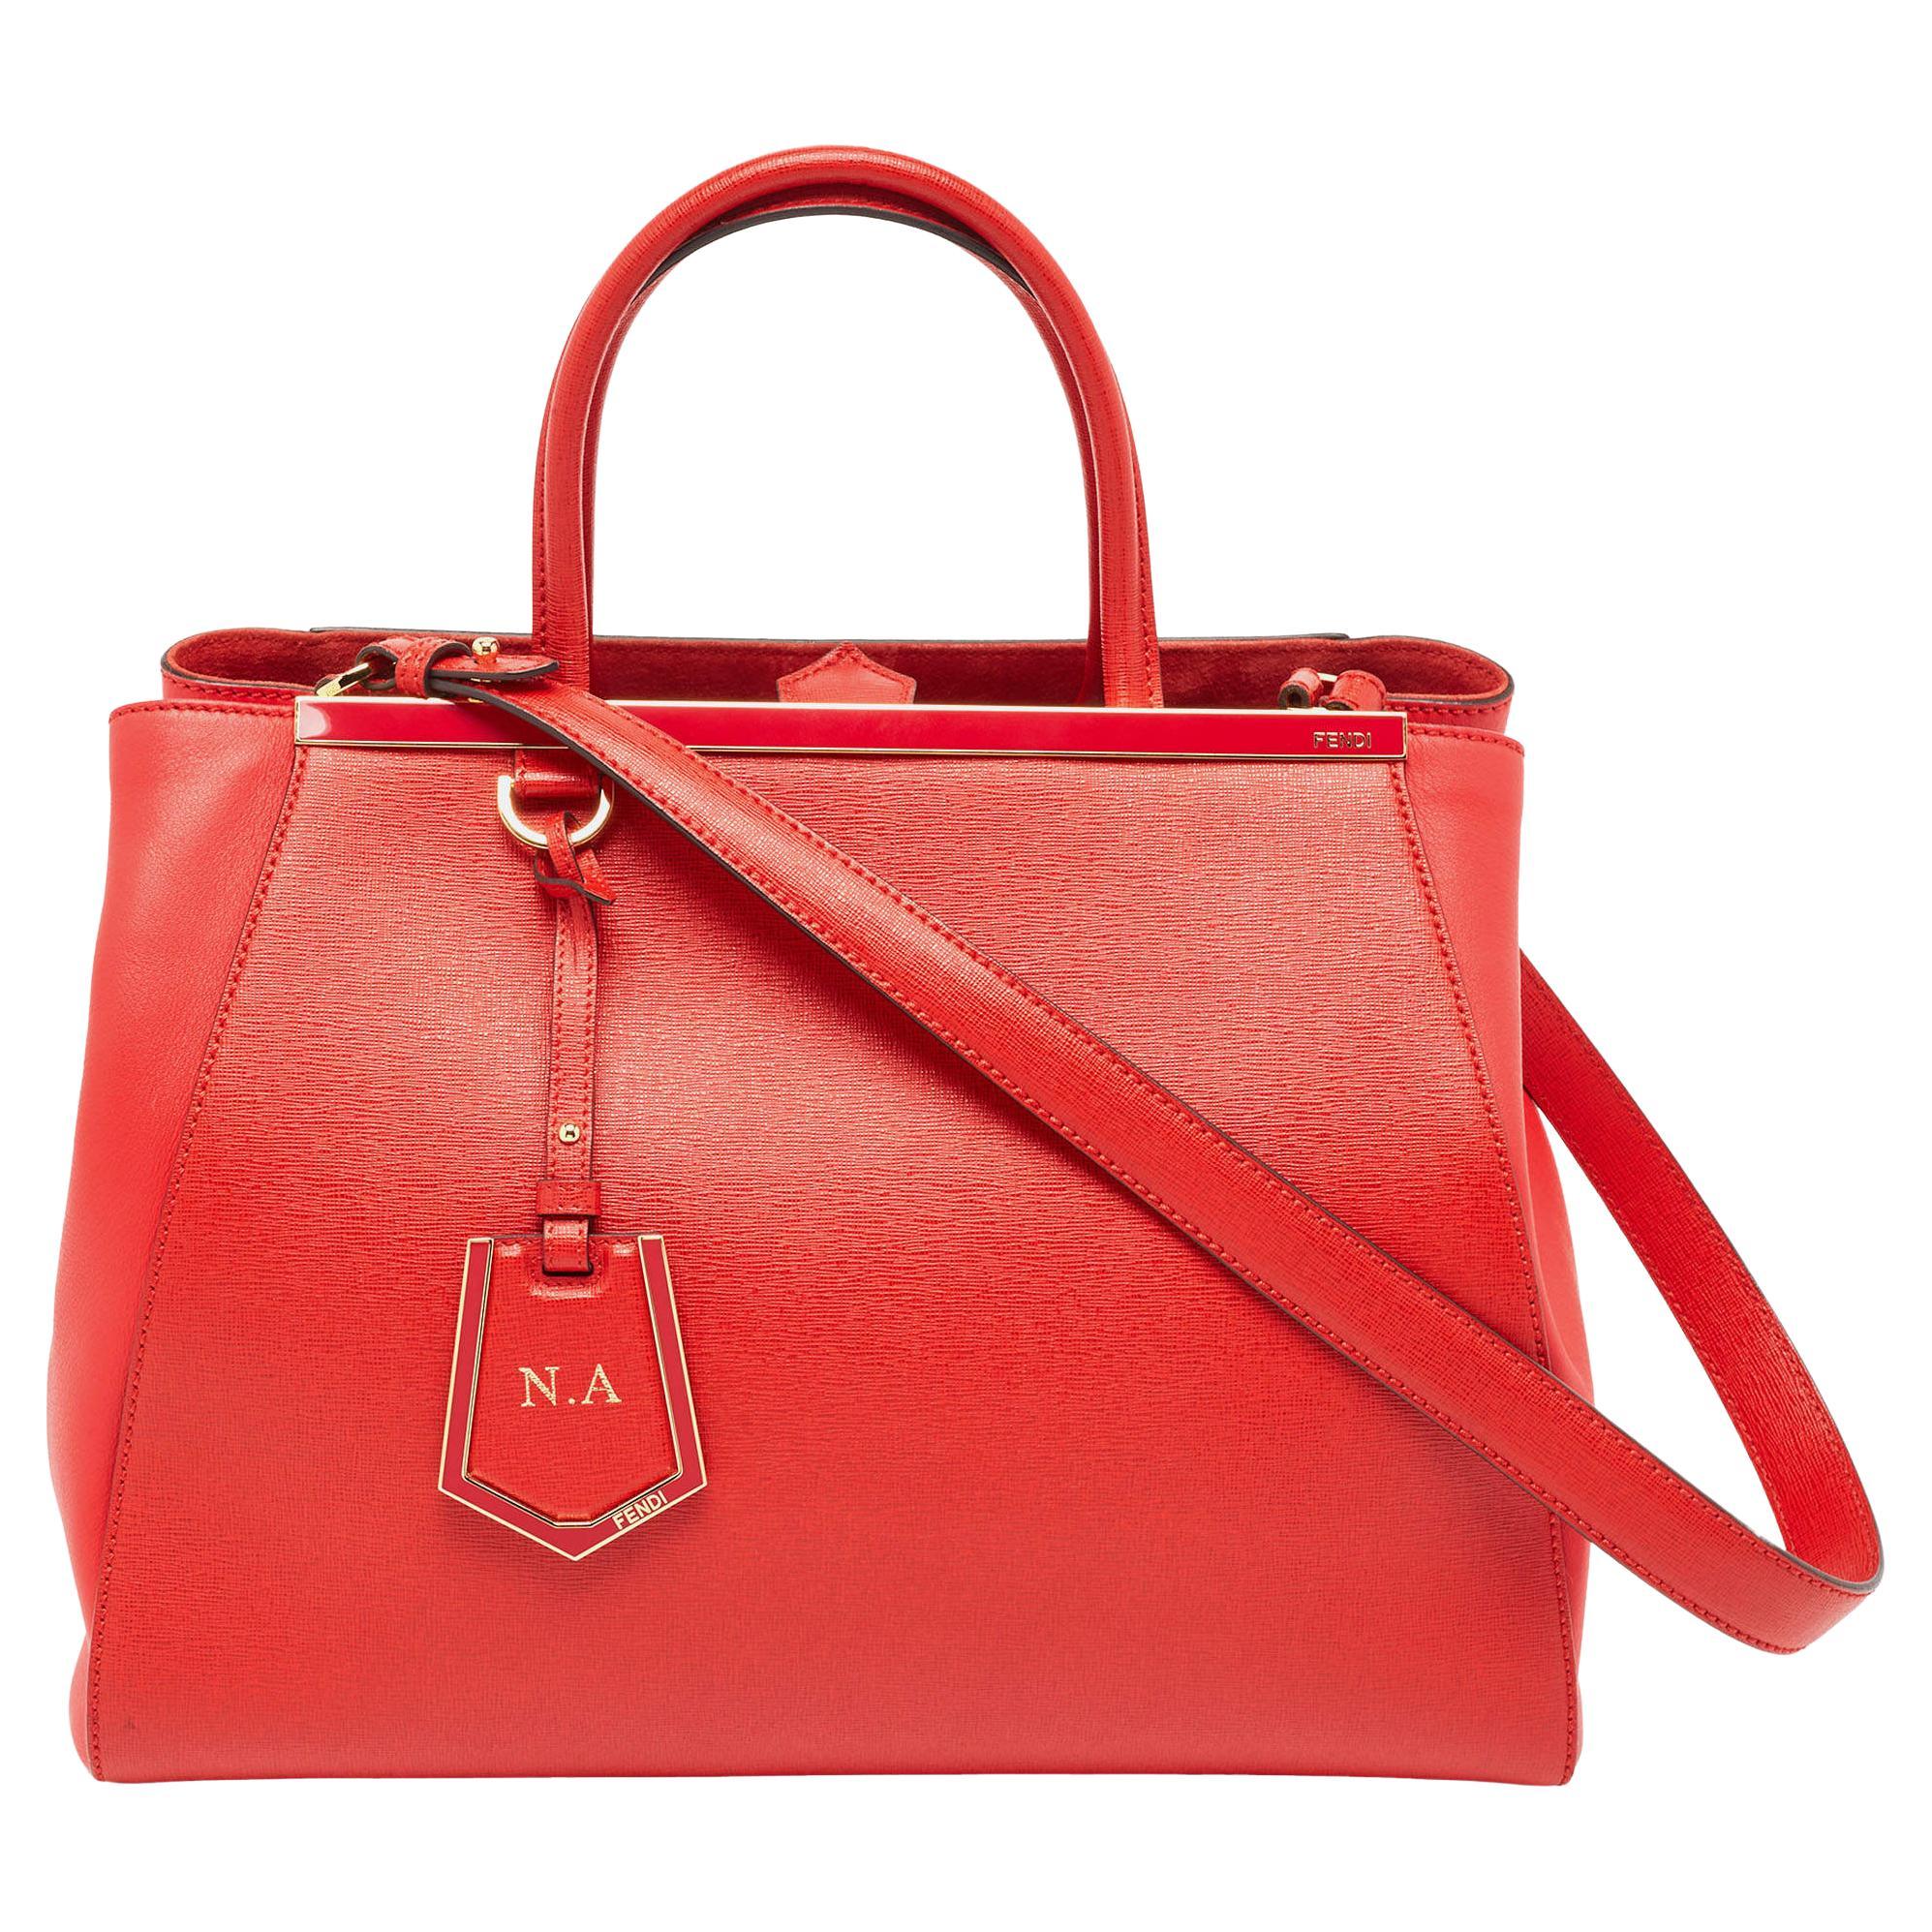 Fendi Red Leather Medium 2Jours Tote For Sale